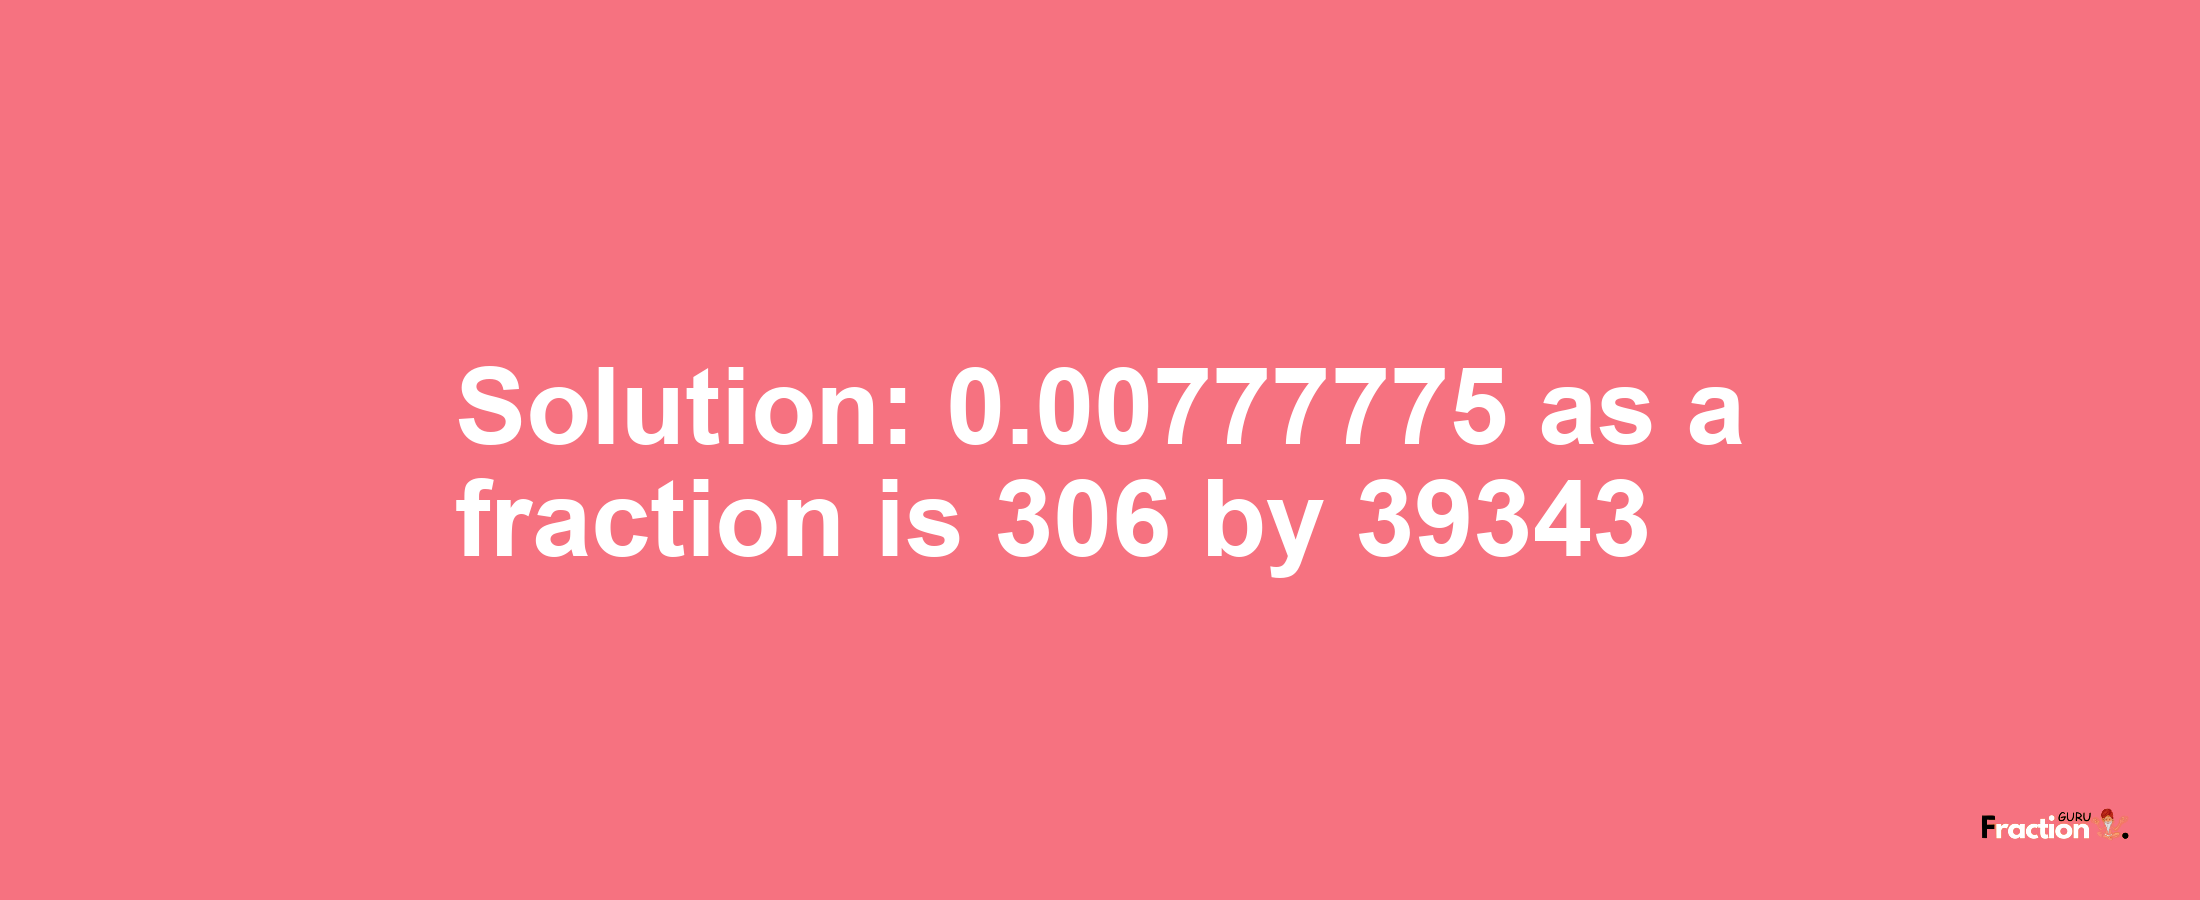 Solution:0.00777775 as a fraction is 306/39343